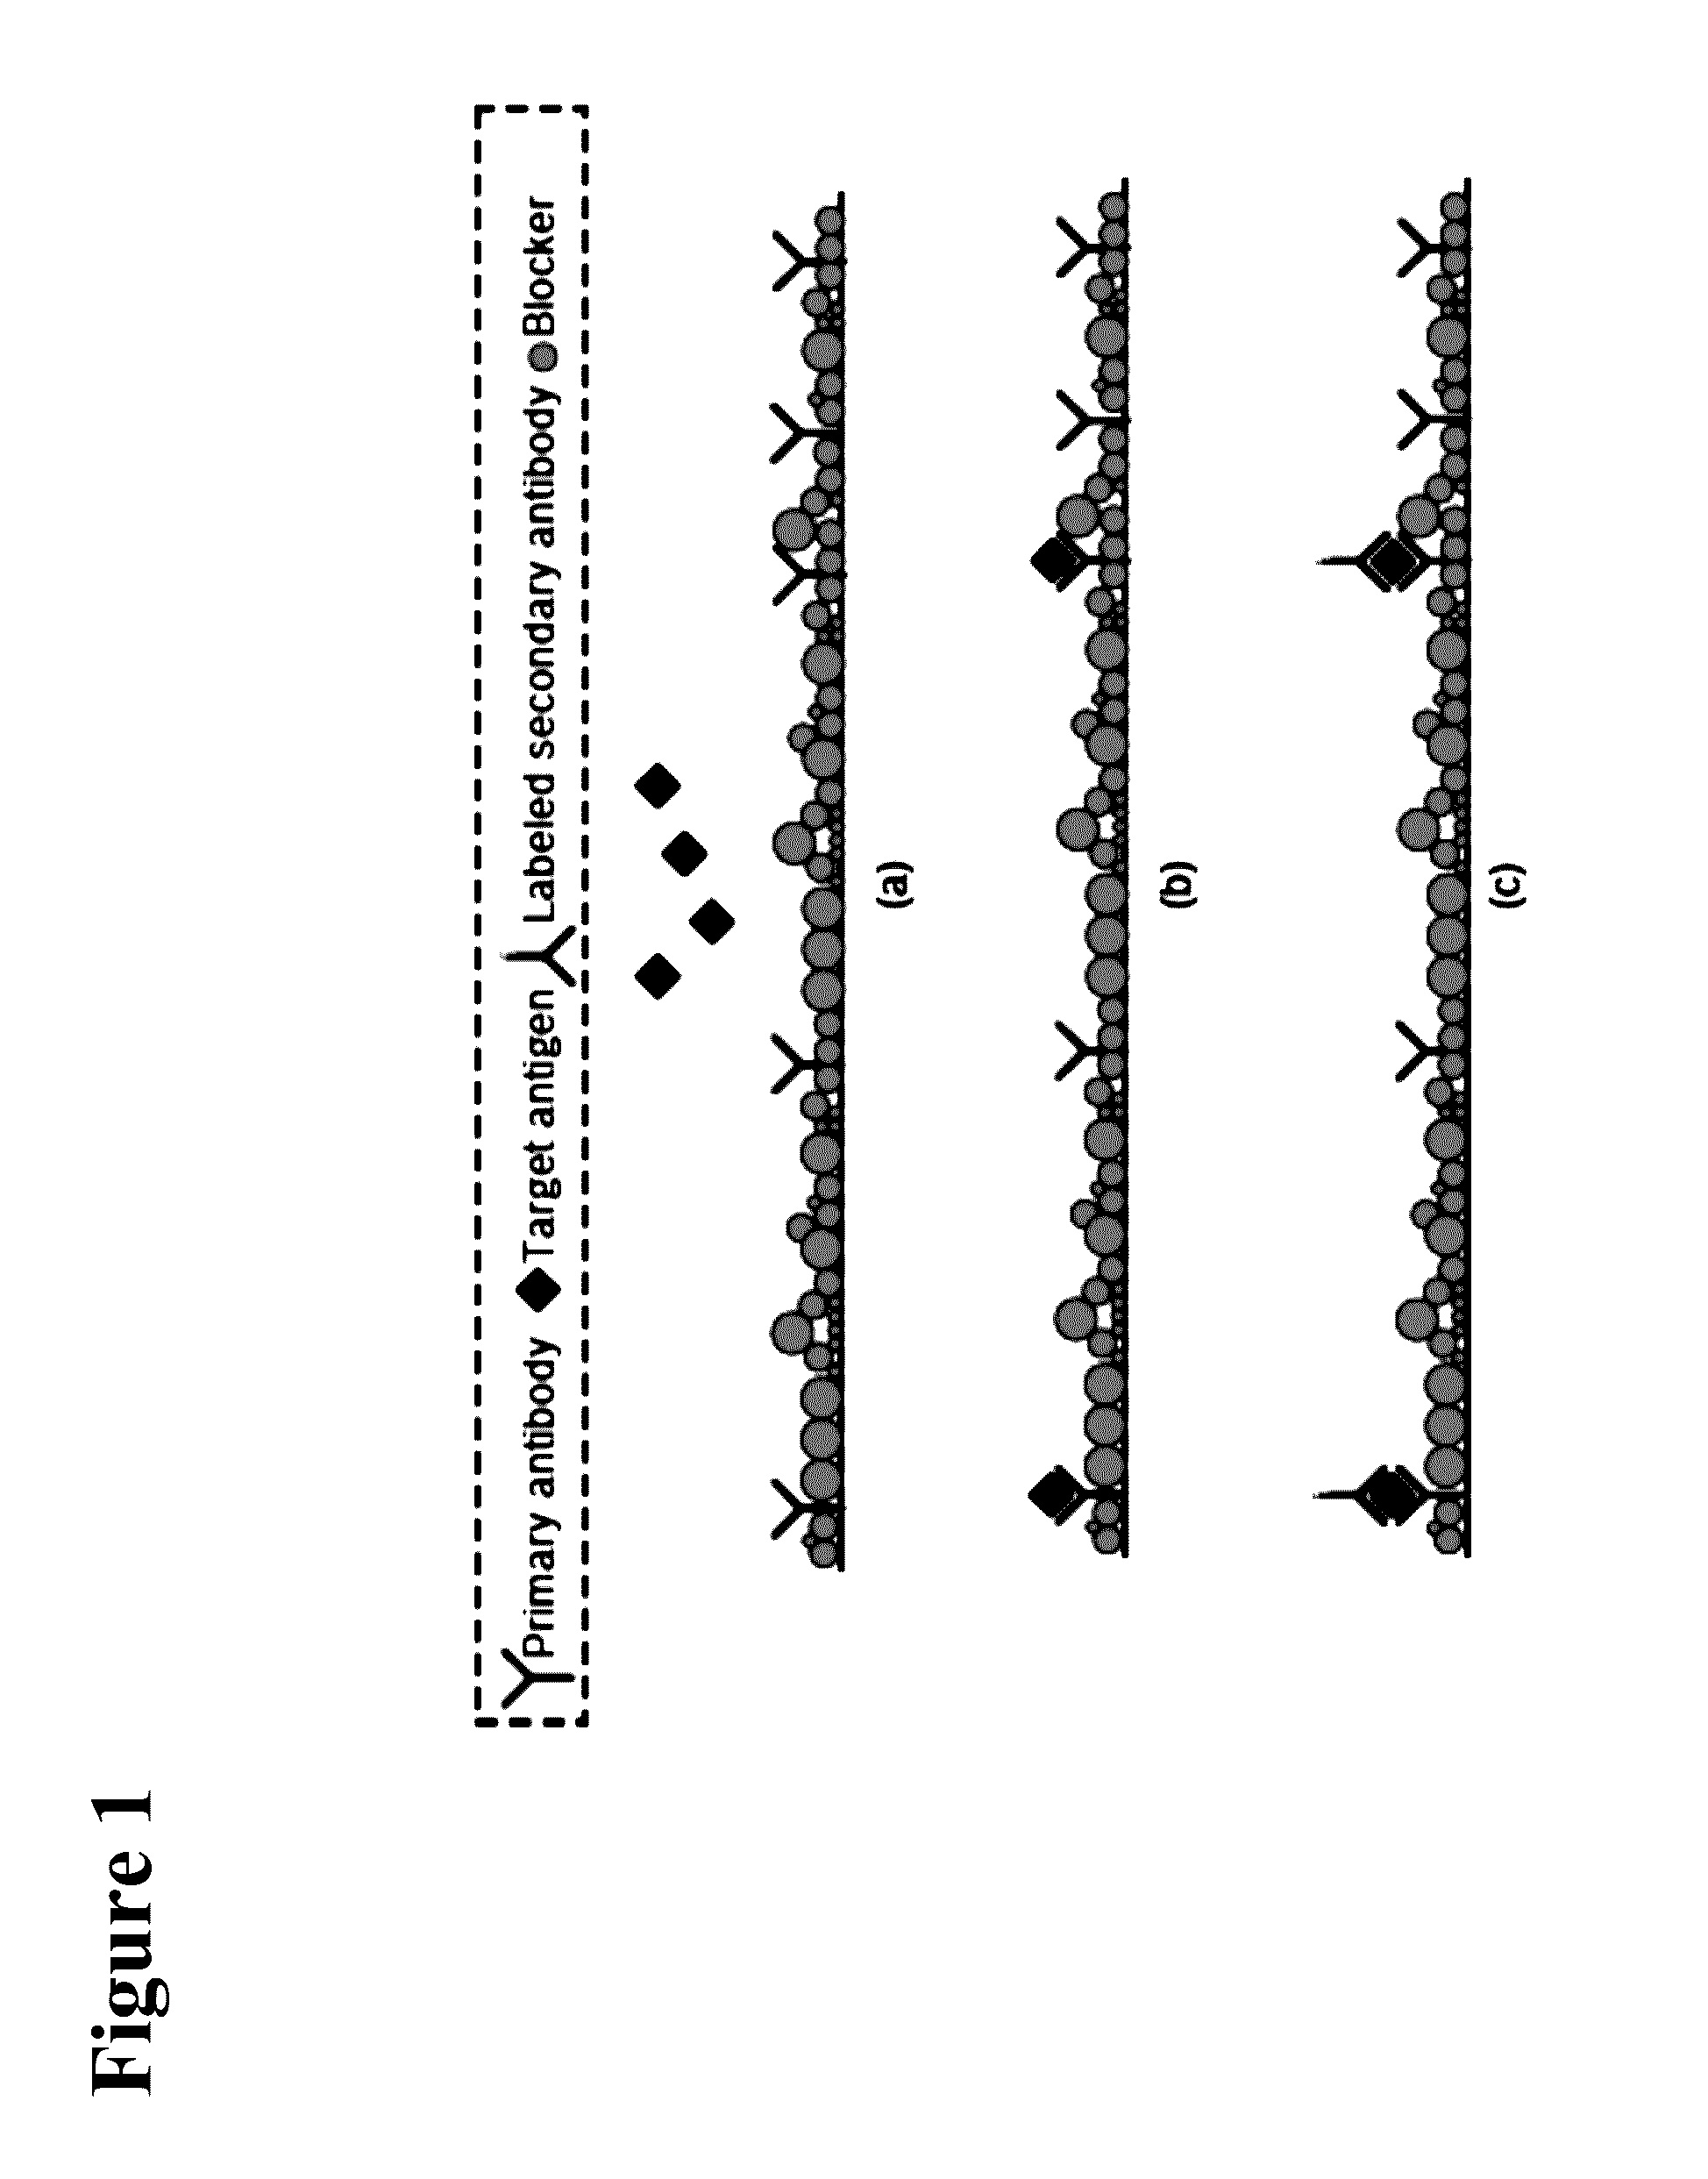 ELECTRONIC CONTROL OF THE pH OF A SOLUTION CLOSE TO AN ELECTRODE SURFACES